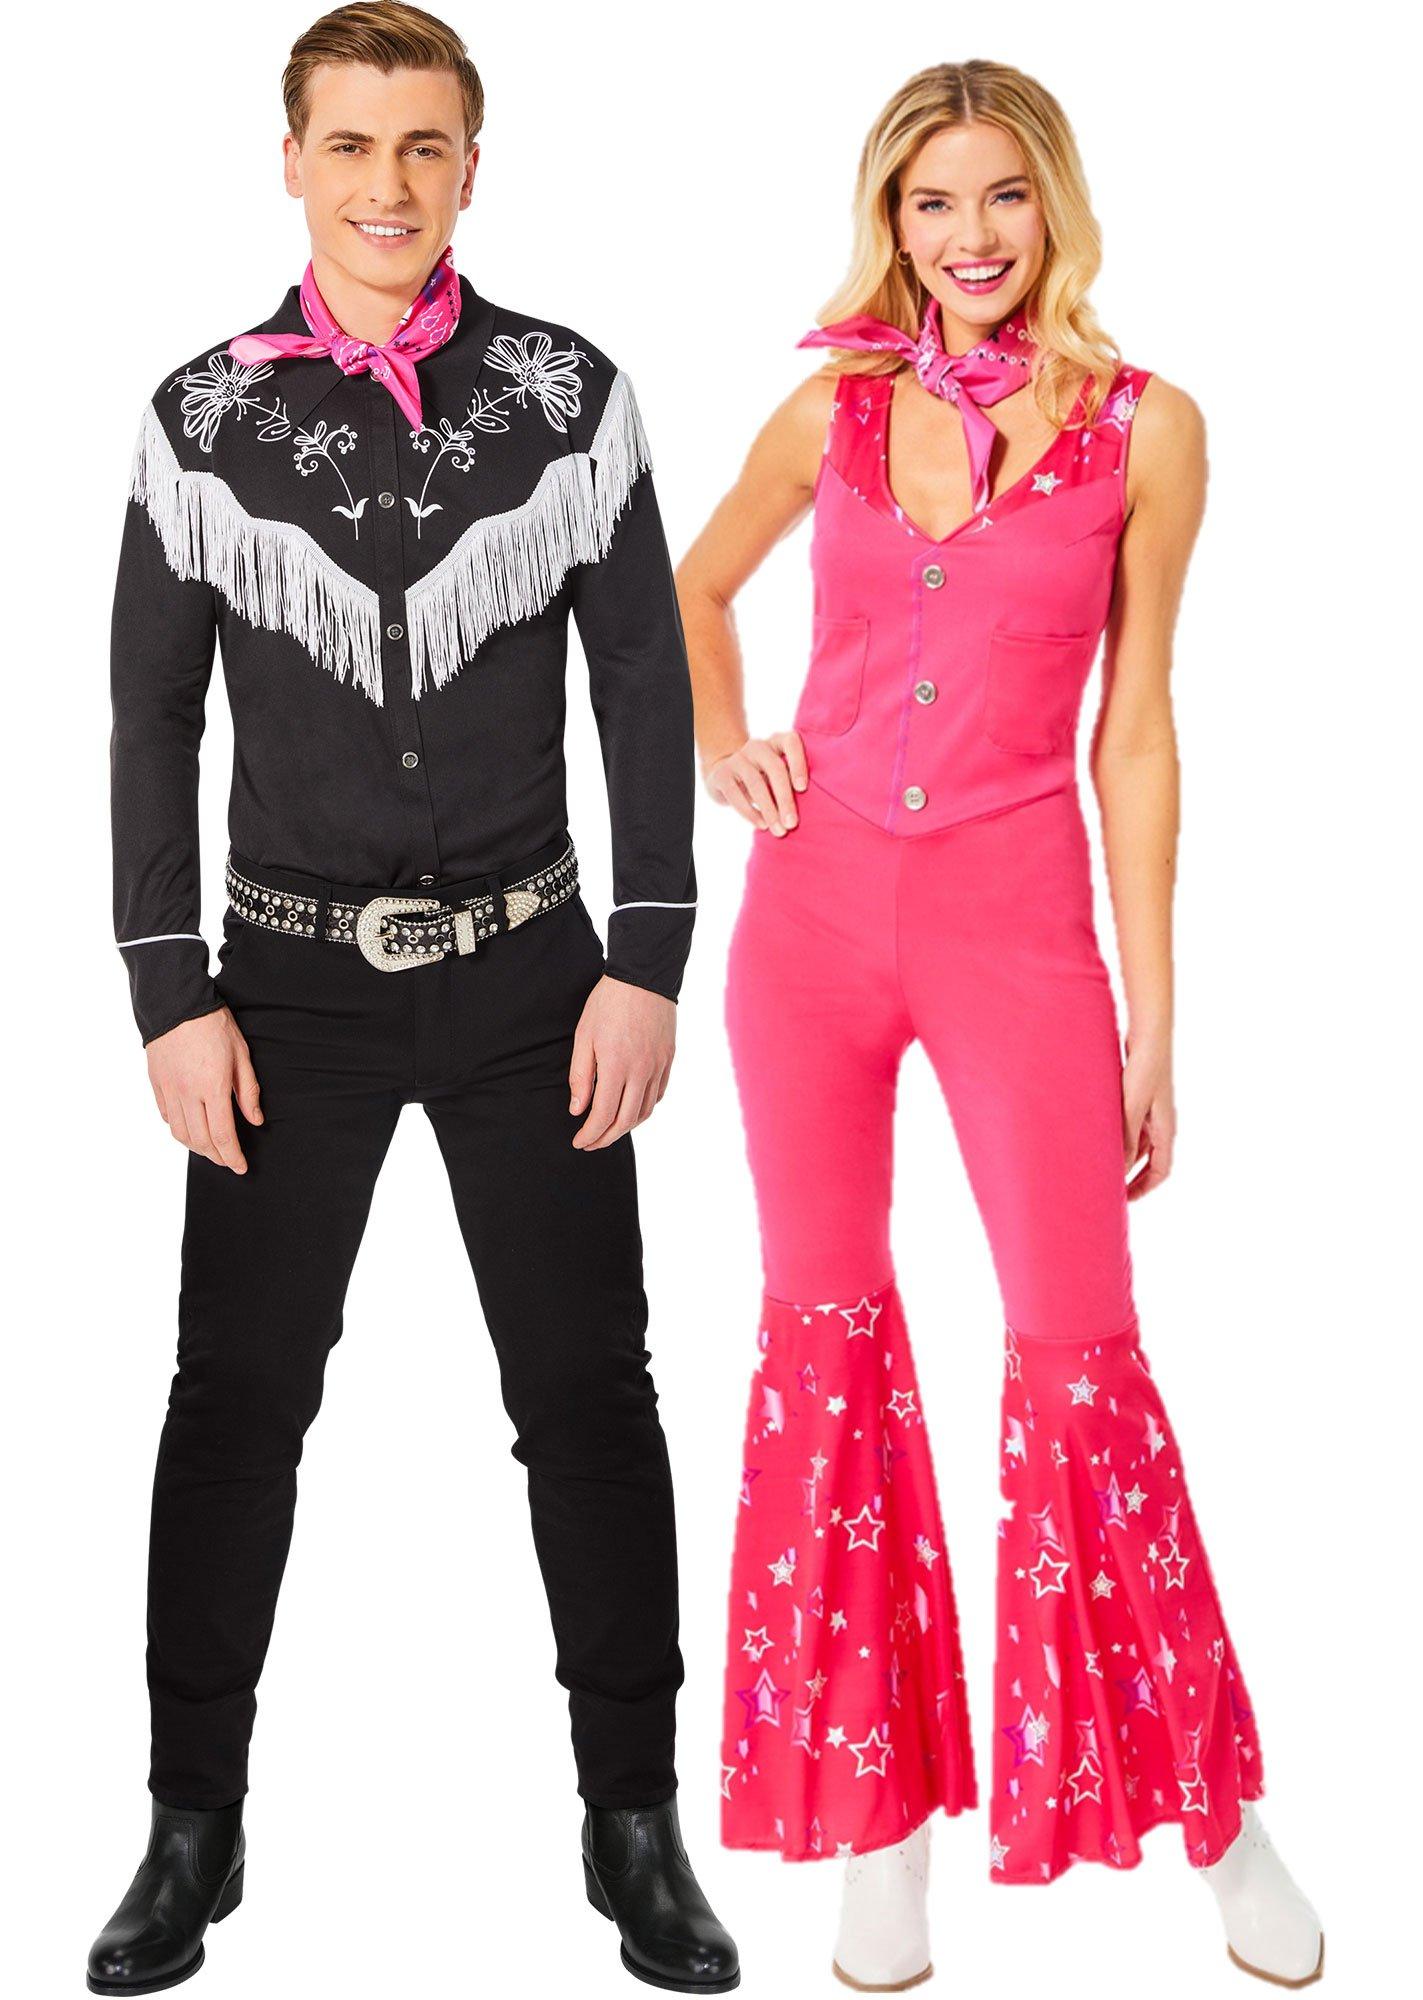 Barbie CowBoy & Cowgirl Costume – Got It For you!